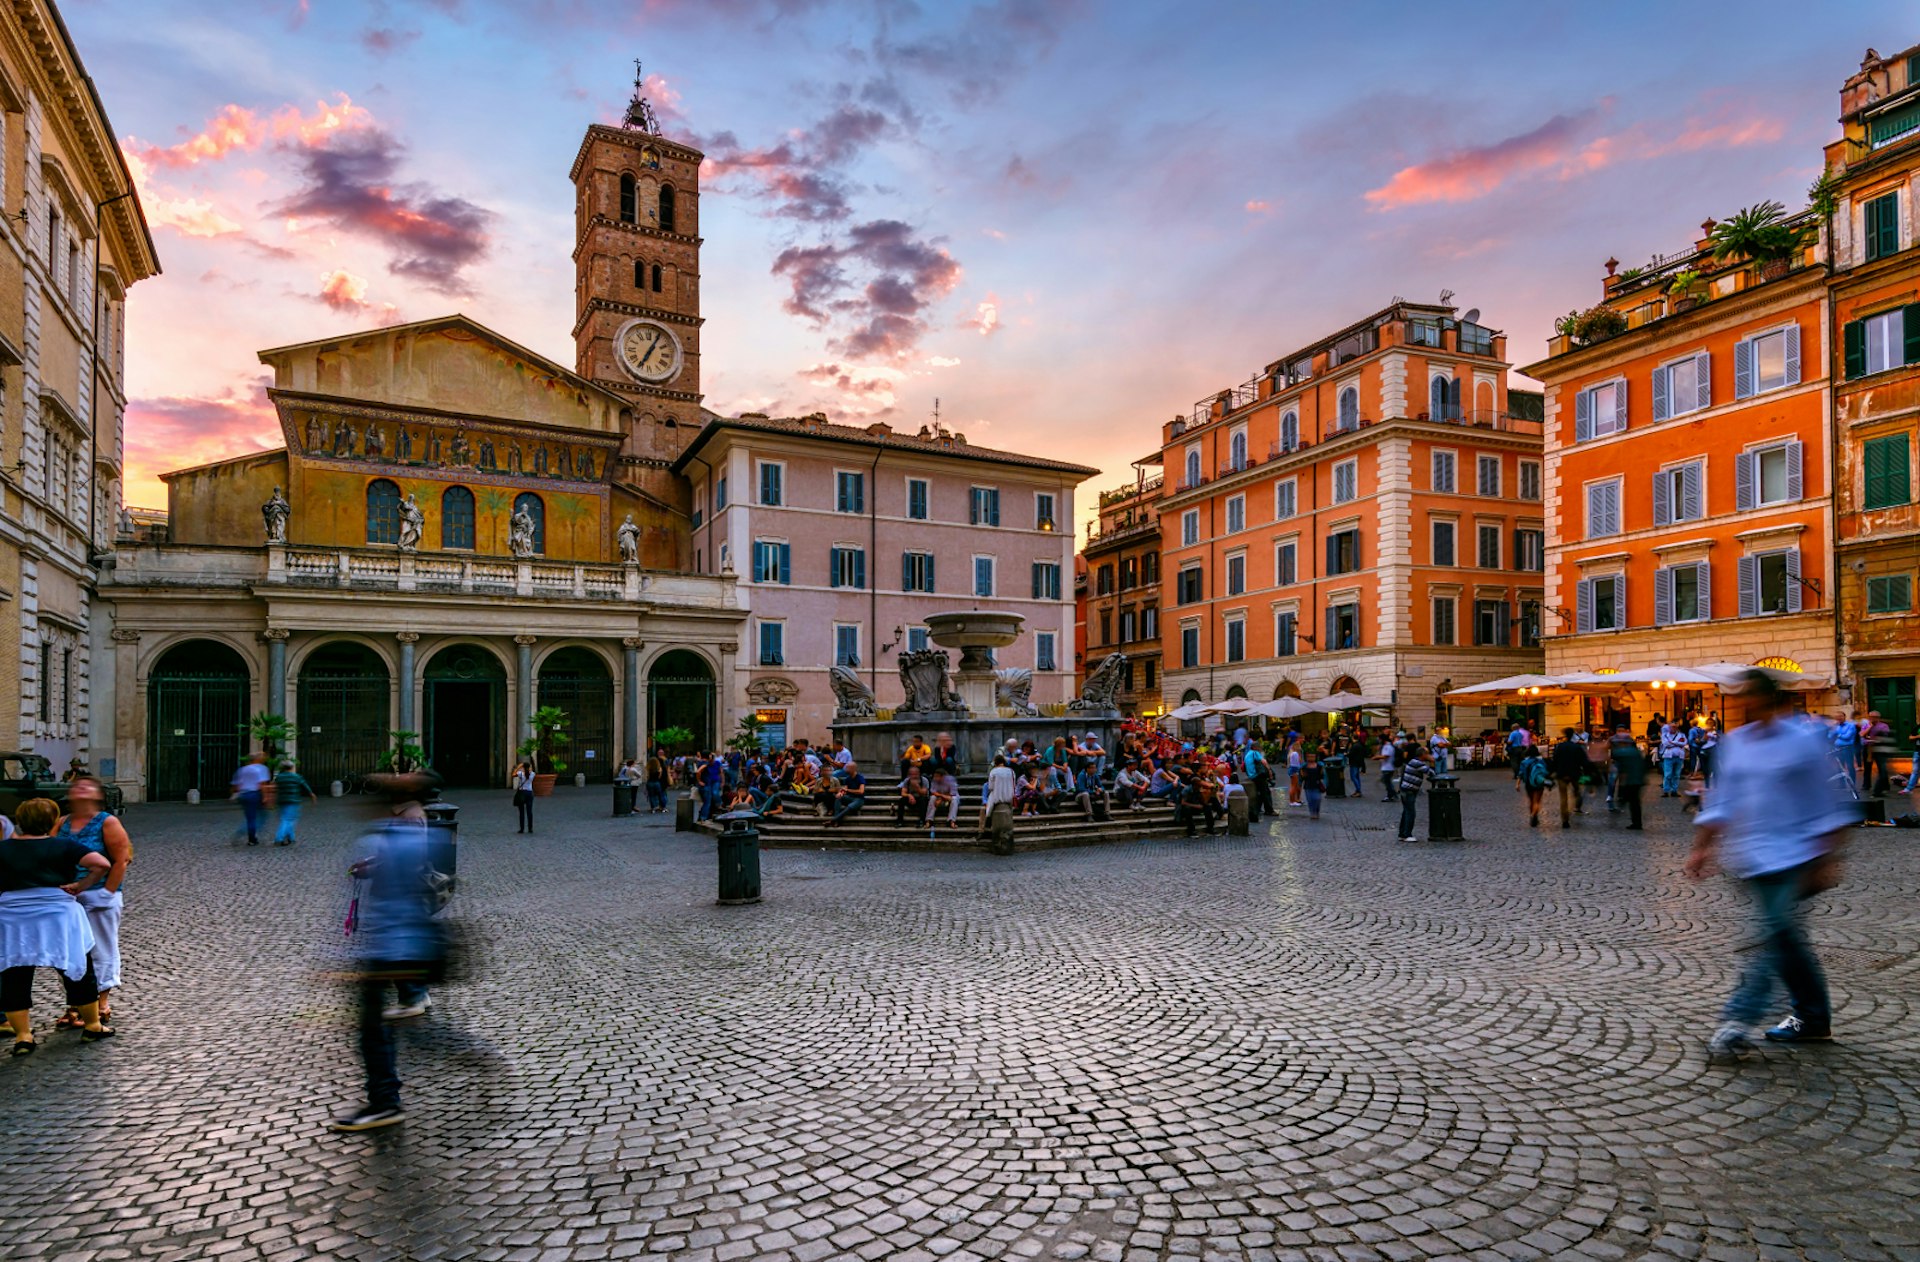 A cobbled square lined by historic buildlings, including Basilica di Santa Maria with its clock tower. People walk to and fro, while others sit on the fountain.